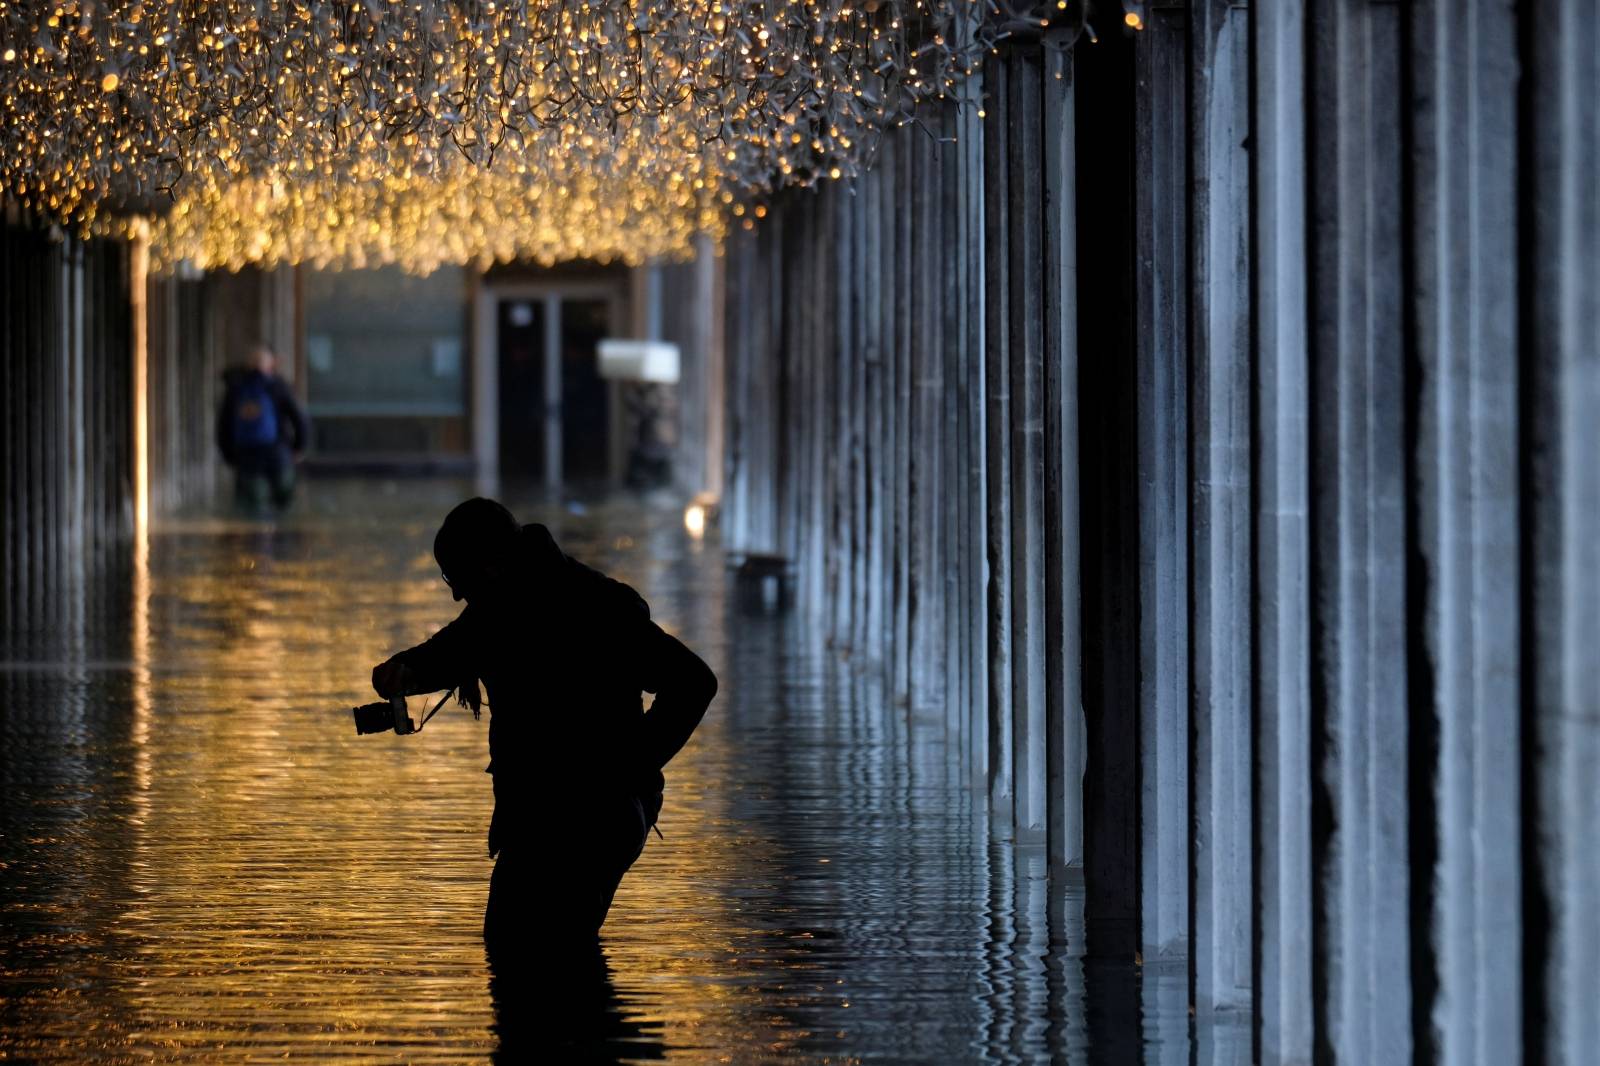 A man wades through a flooded street during high tide in Venice